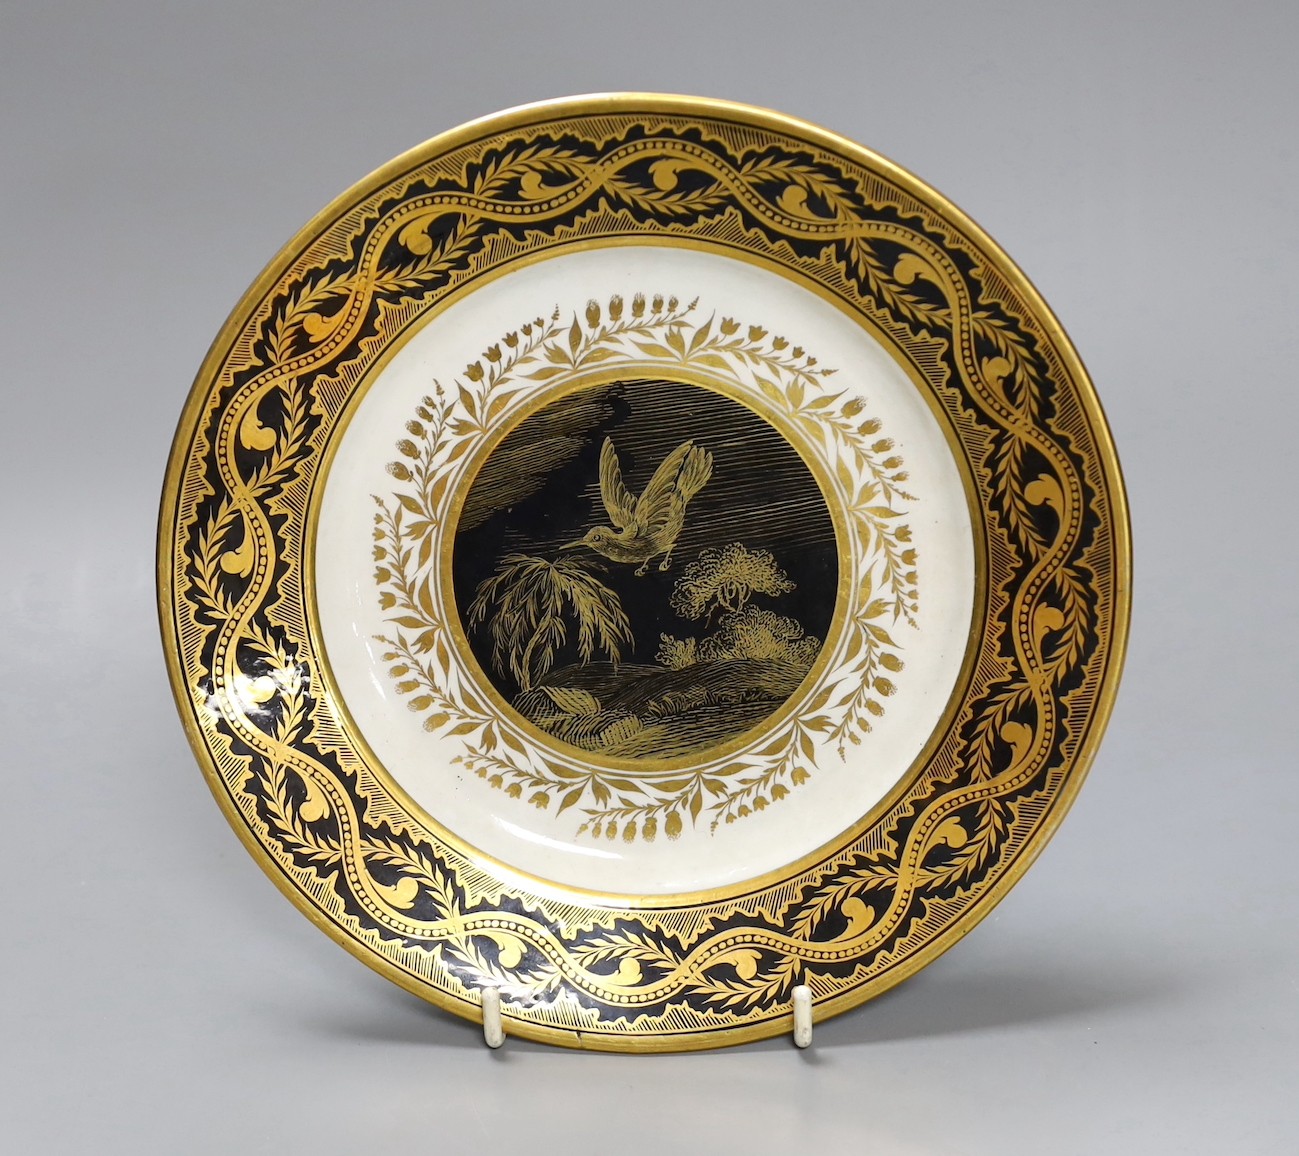 A rare Derby plate from the Pares service, c.1810, 21.5cm diameter